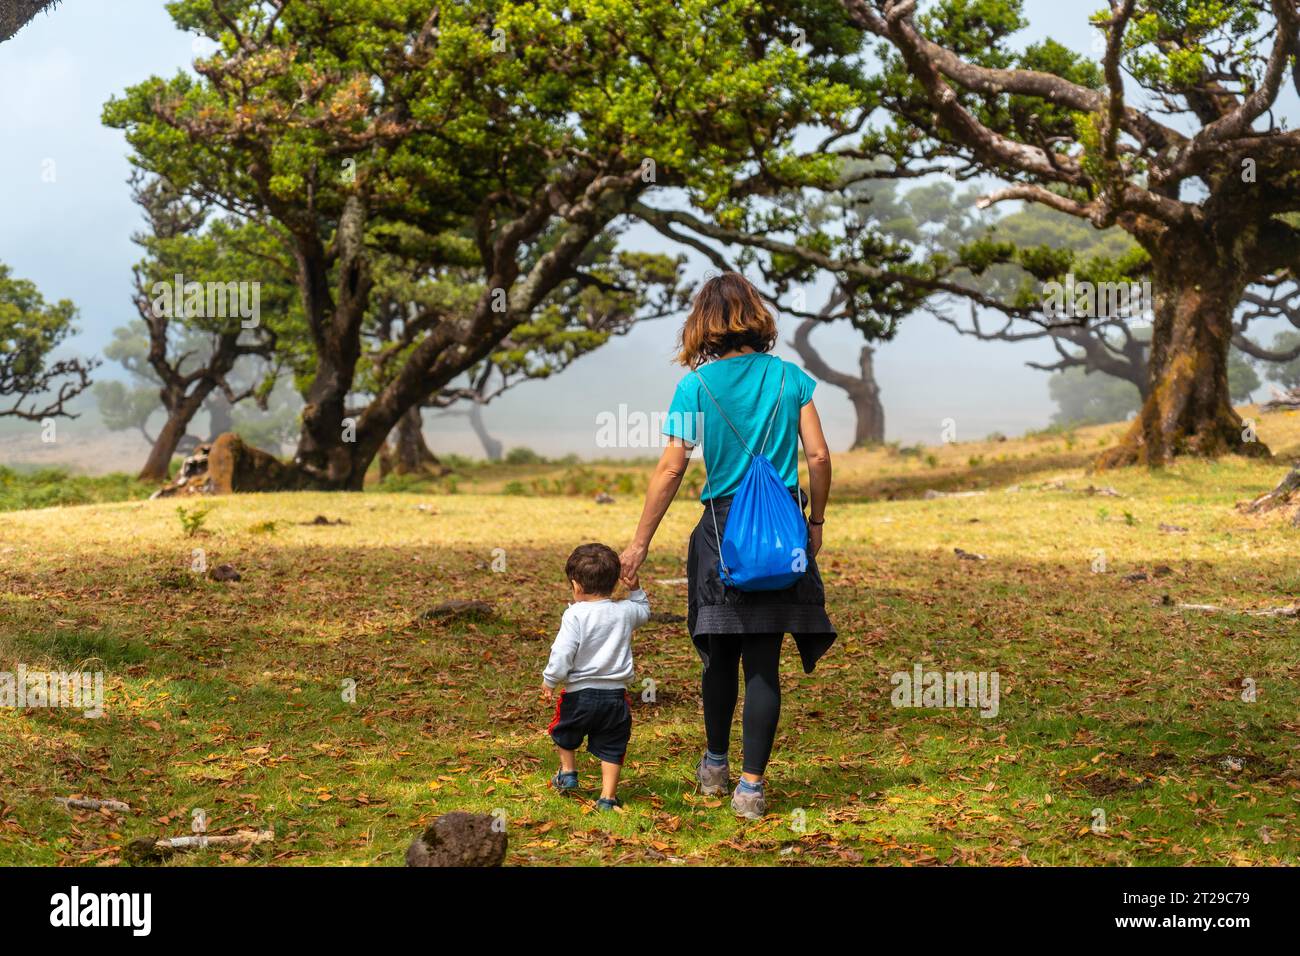 Fanal forest in Madeira, mother with her son having fun among laurel trees in summer Stock Photo